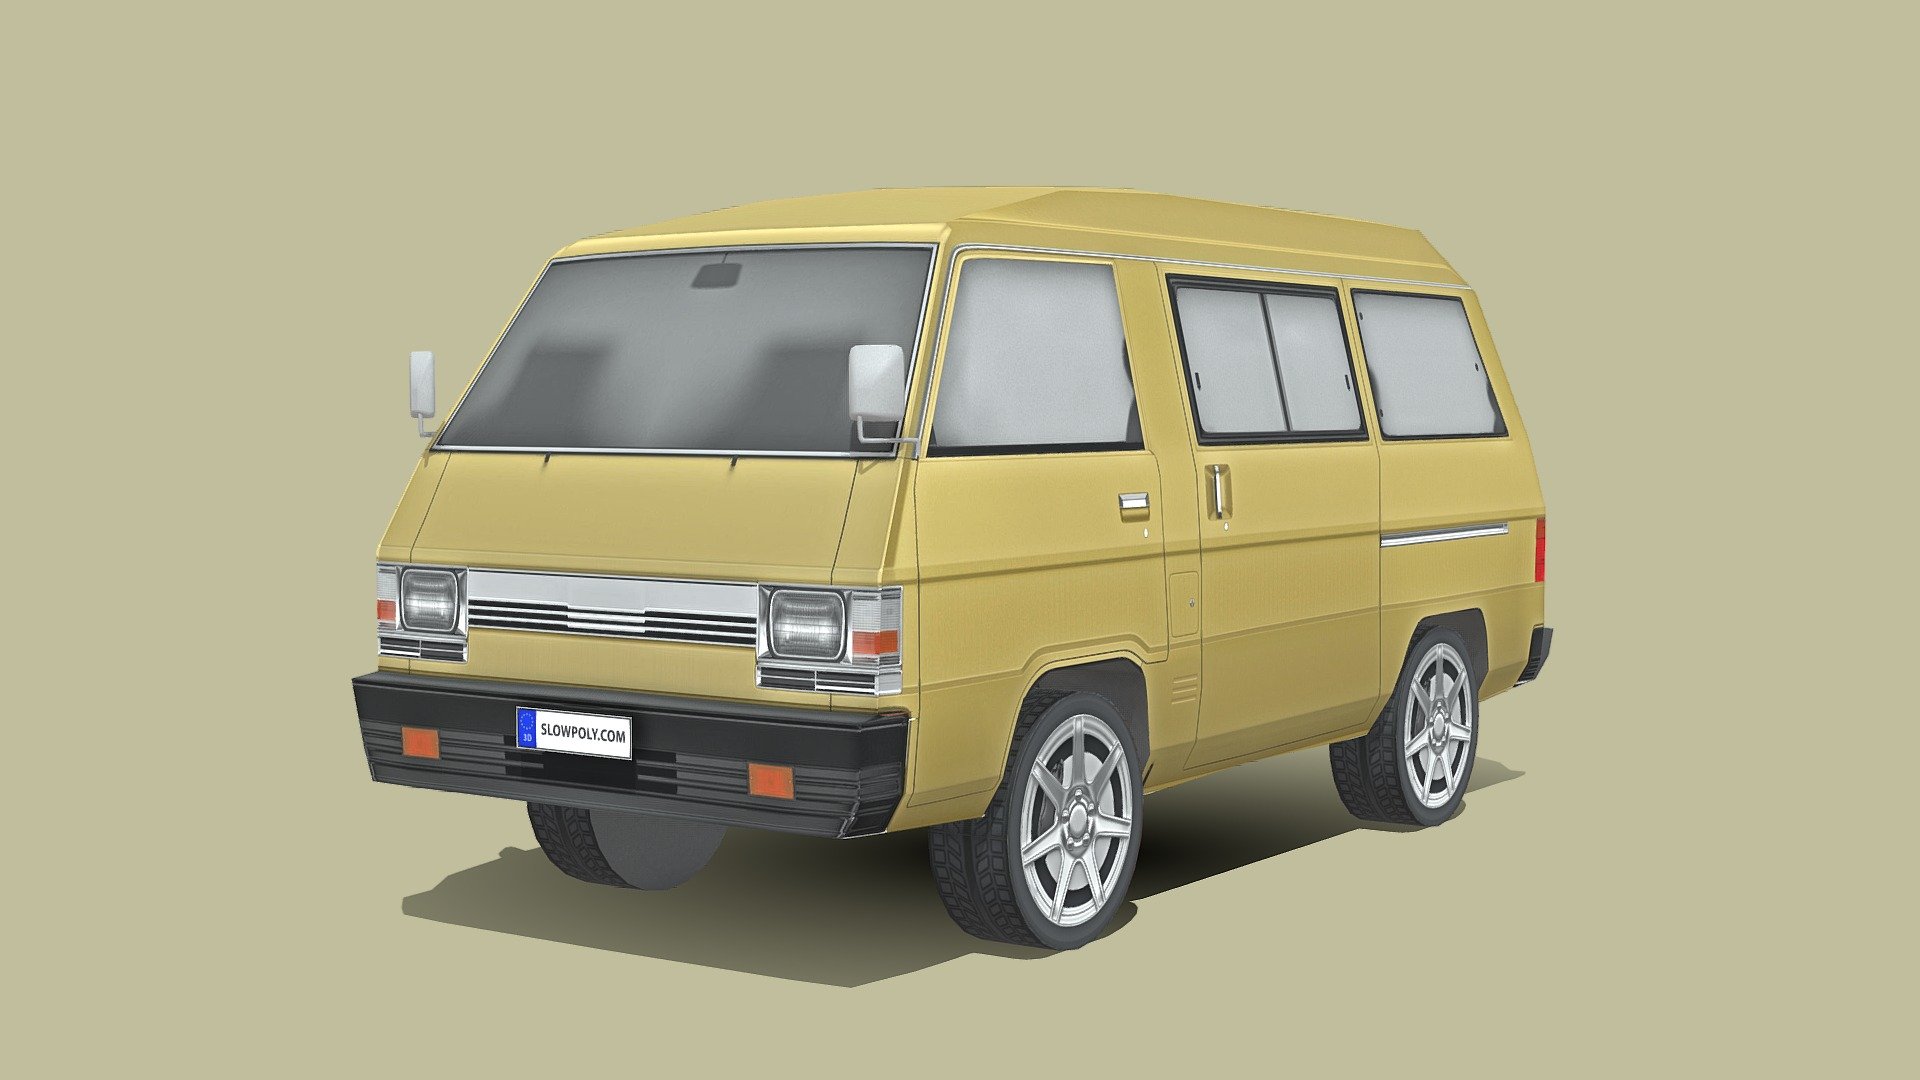 Mitsubishi Delica Wagon 1982 low poly cars, nice detail with high quality 4000px textures, nice topology and clean mesh - Mitsubishi Delica Wagon 1982 - Buy Royalty Free 3D model by slowpoly 3d model